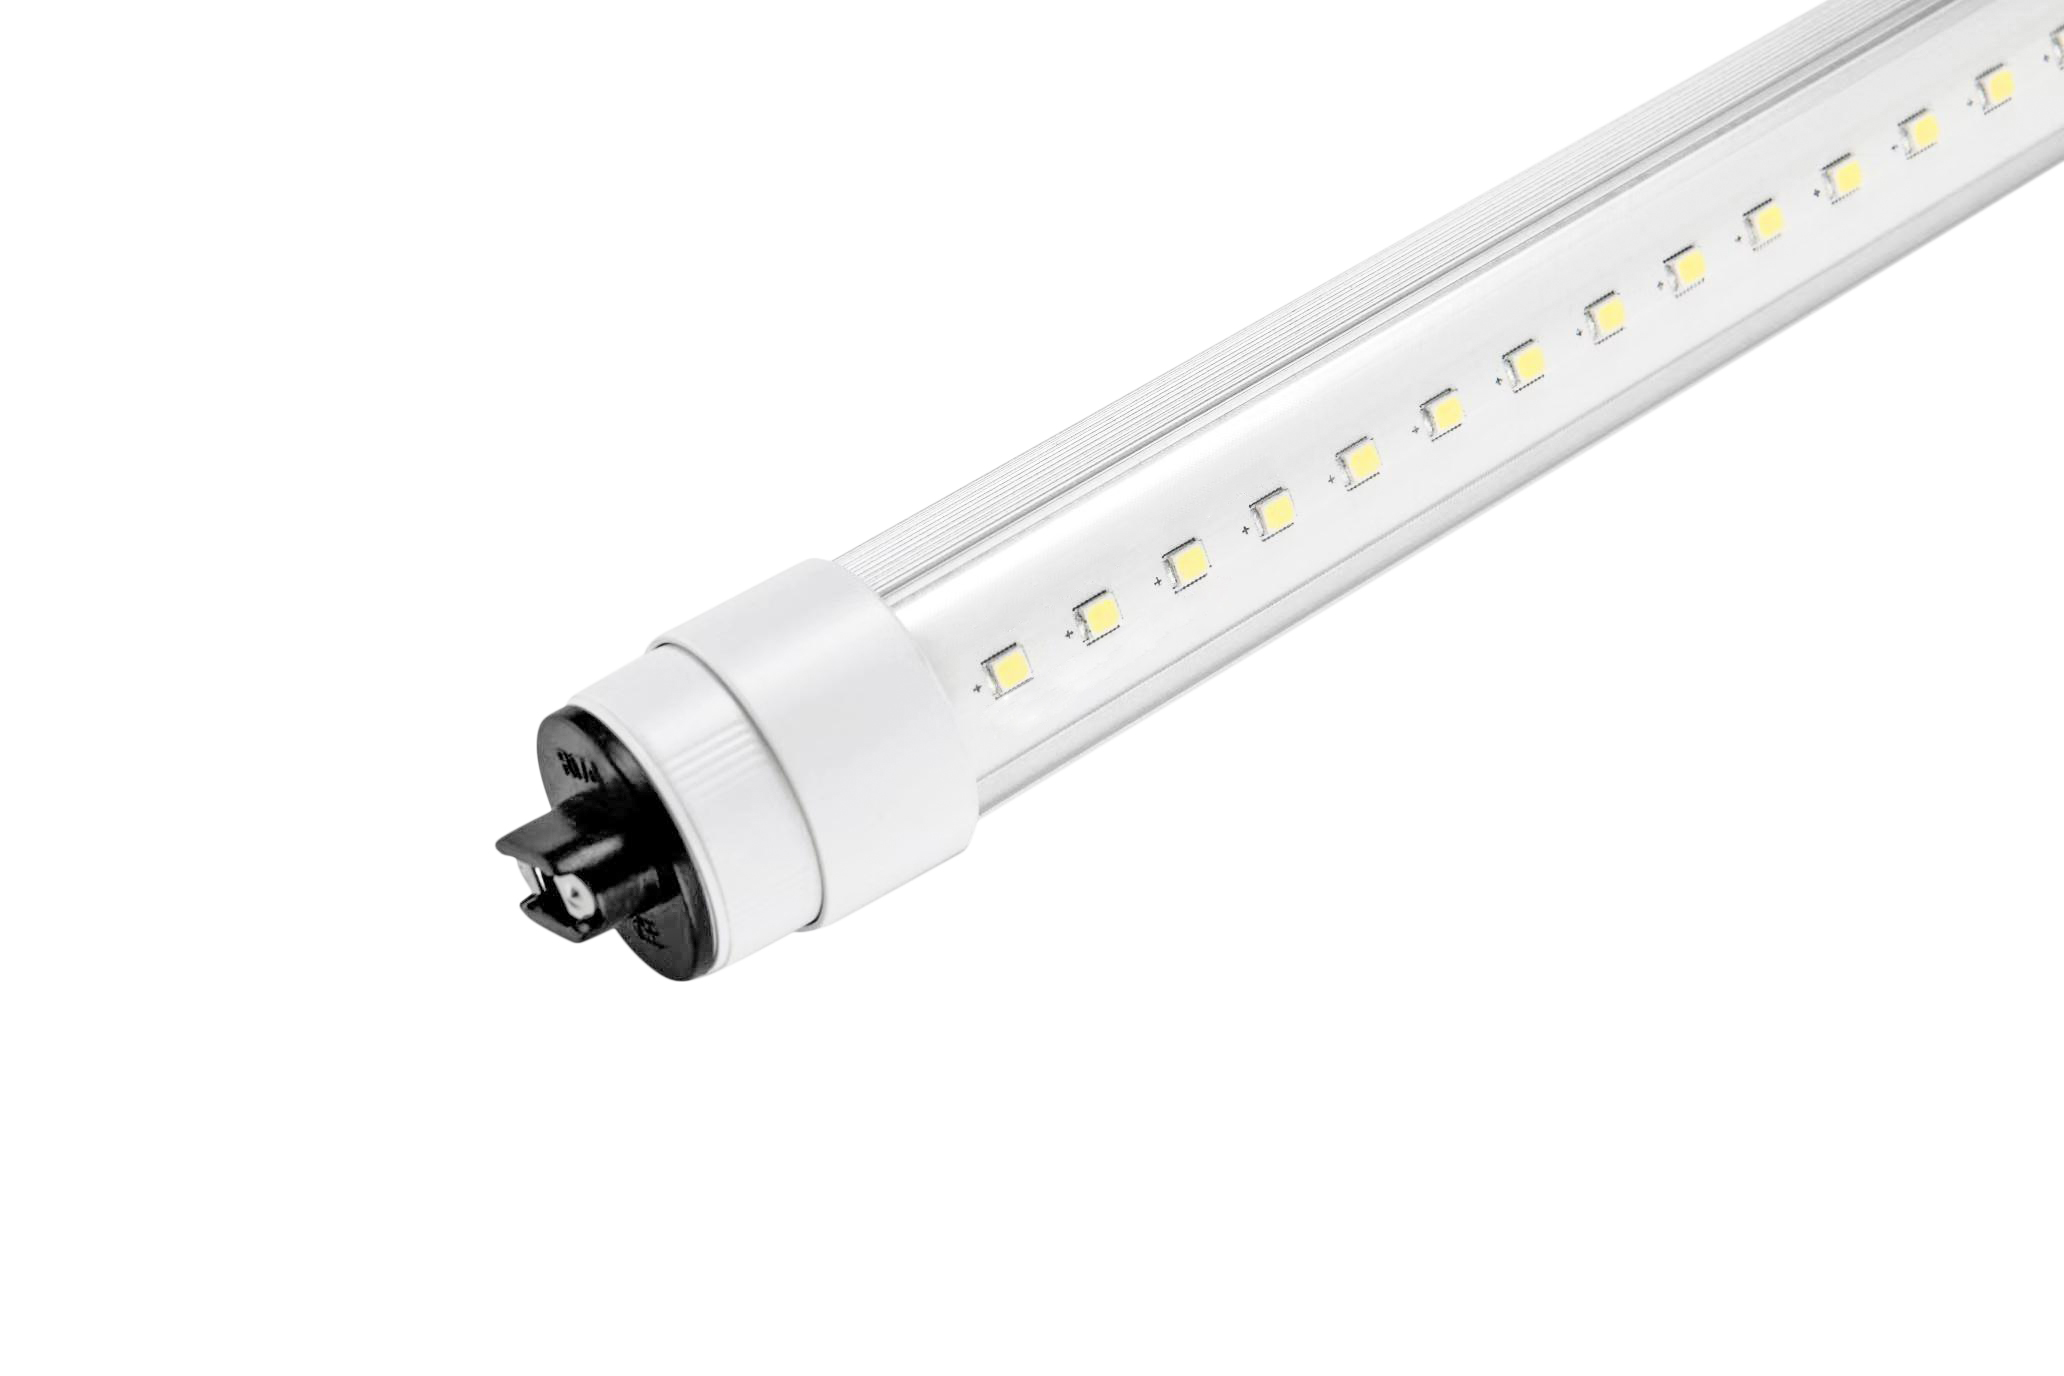 What Is The Diameter Of A T-12 Fluorescent Lamp?